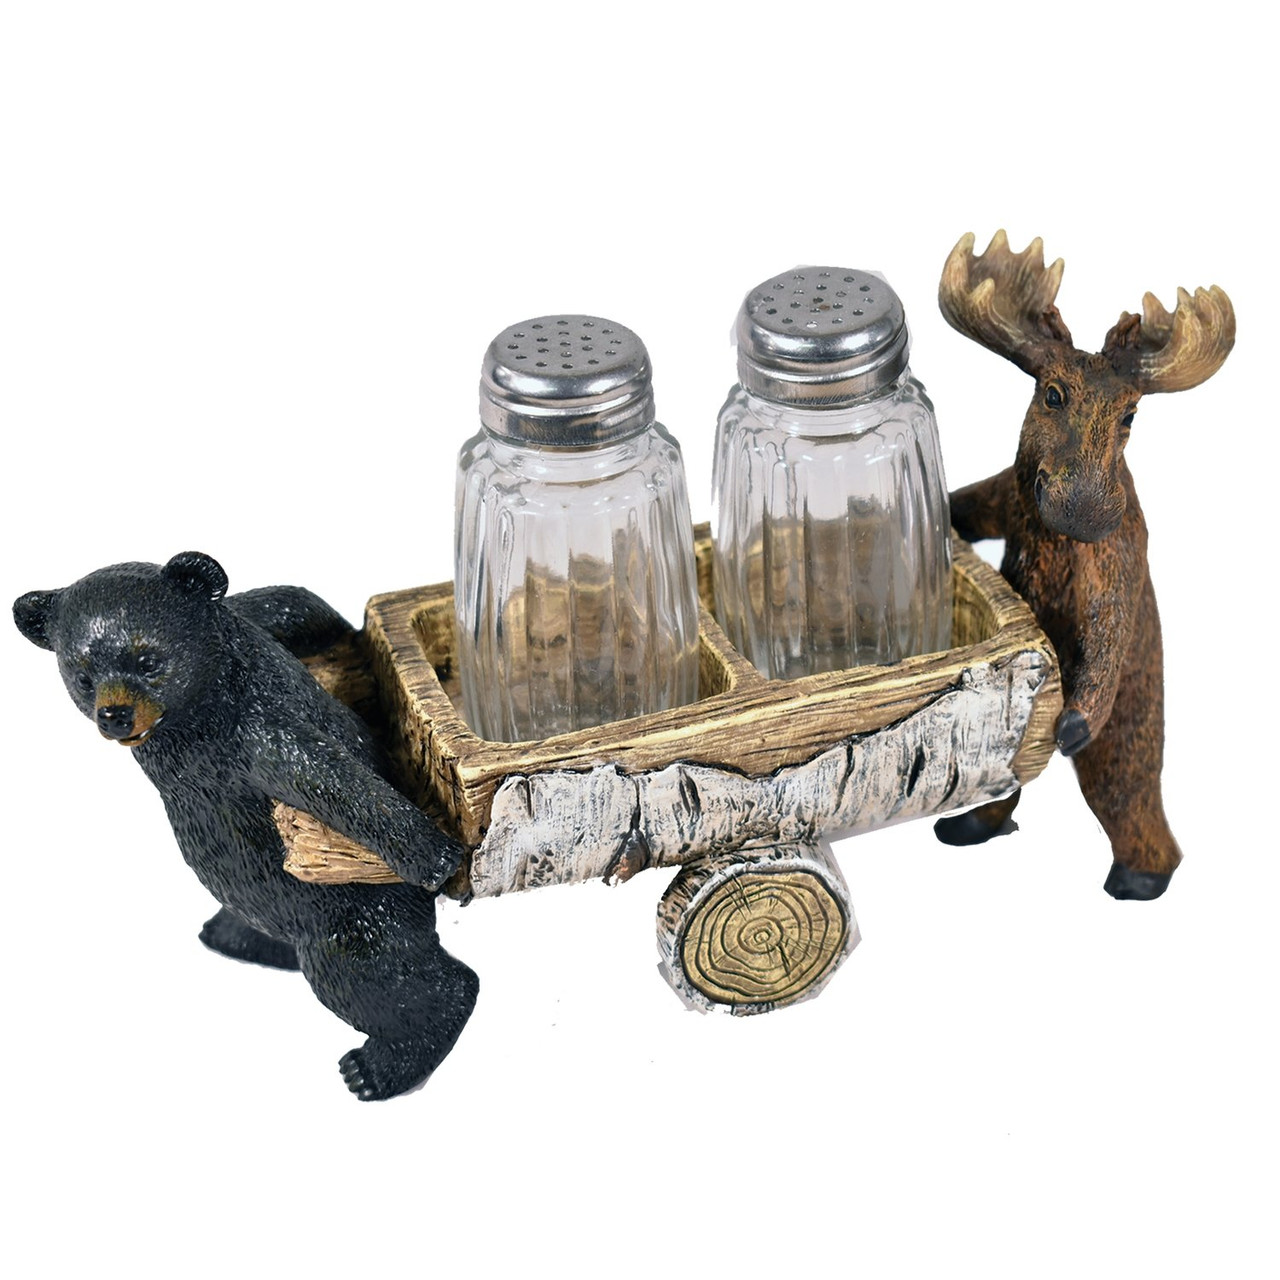 A Salt and pepper shaker with Black Bear and a  Moose holding them Table top items